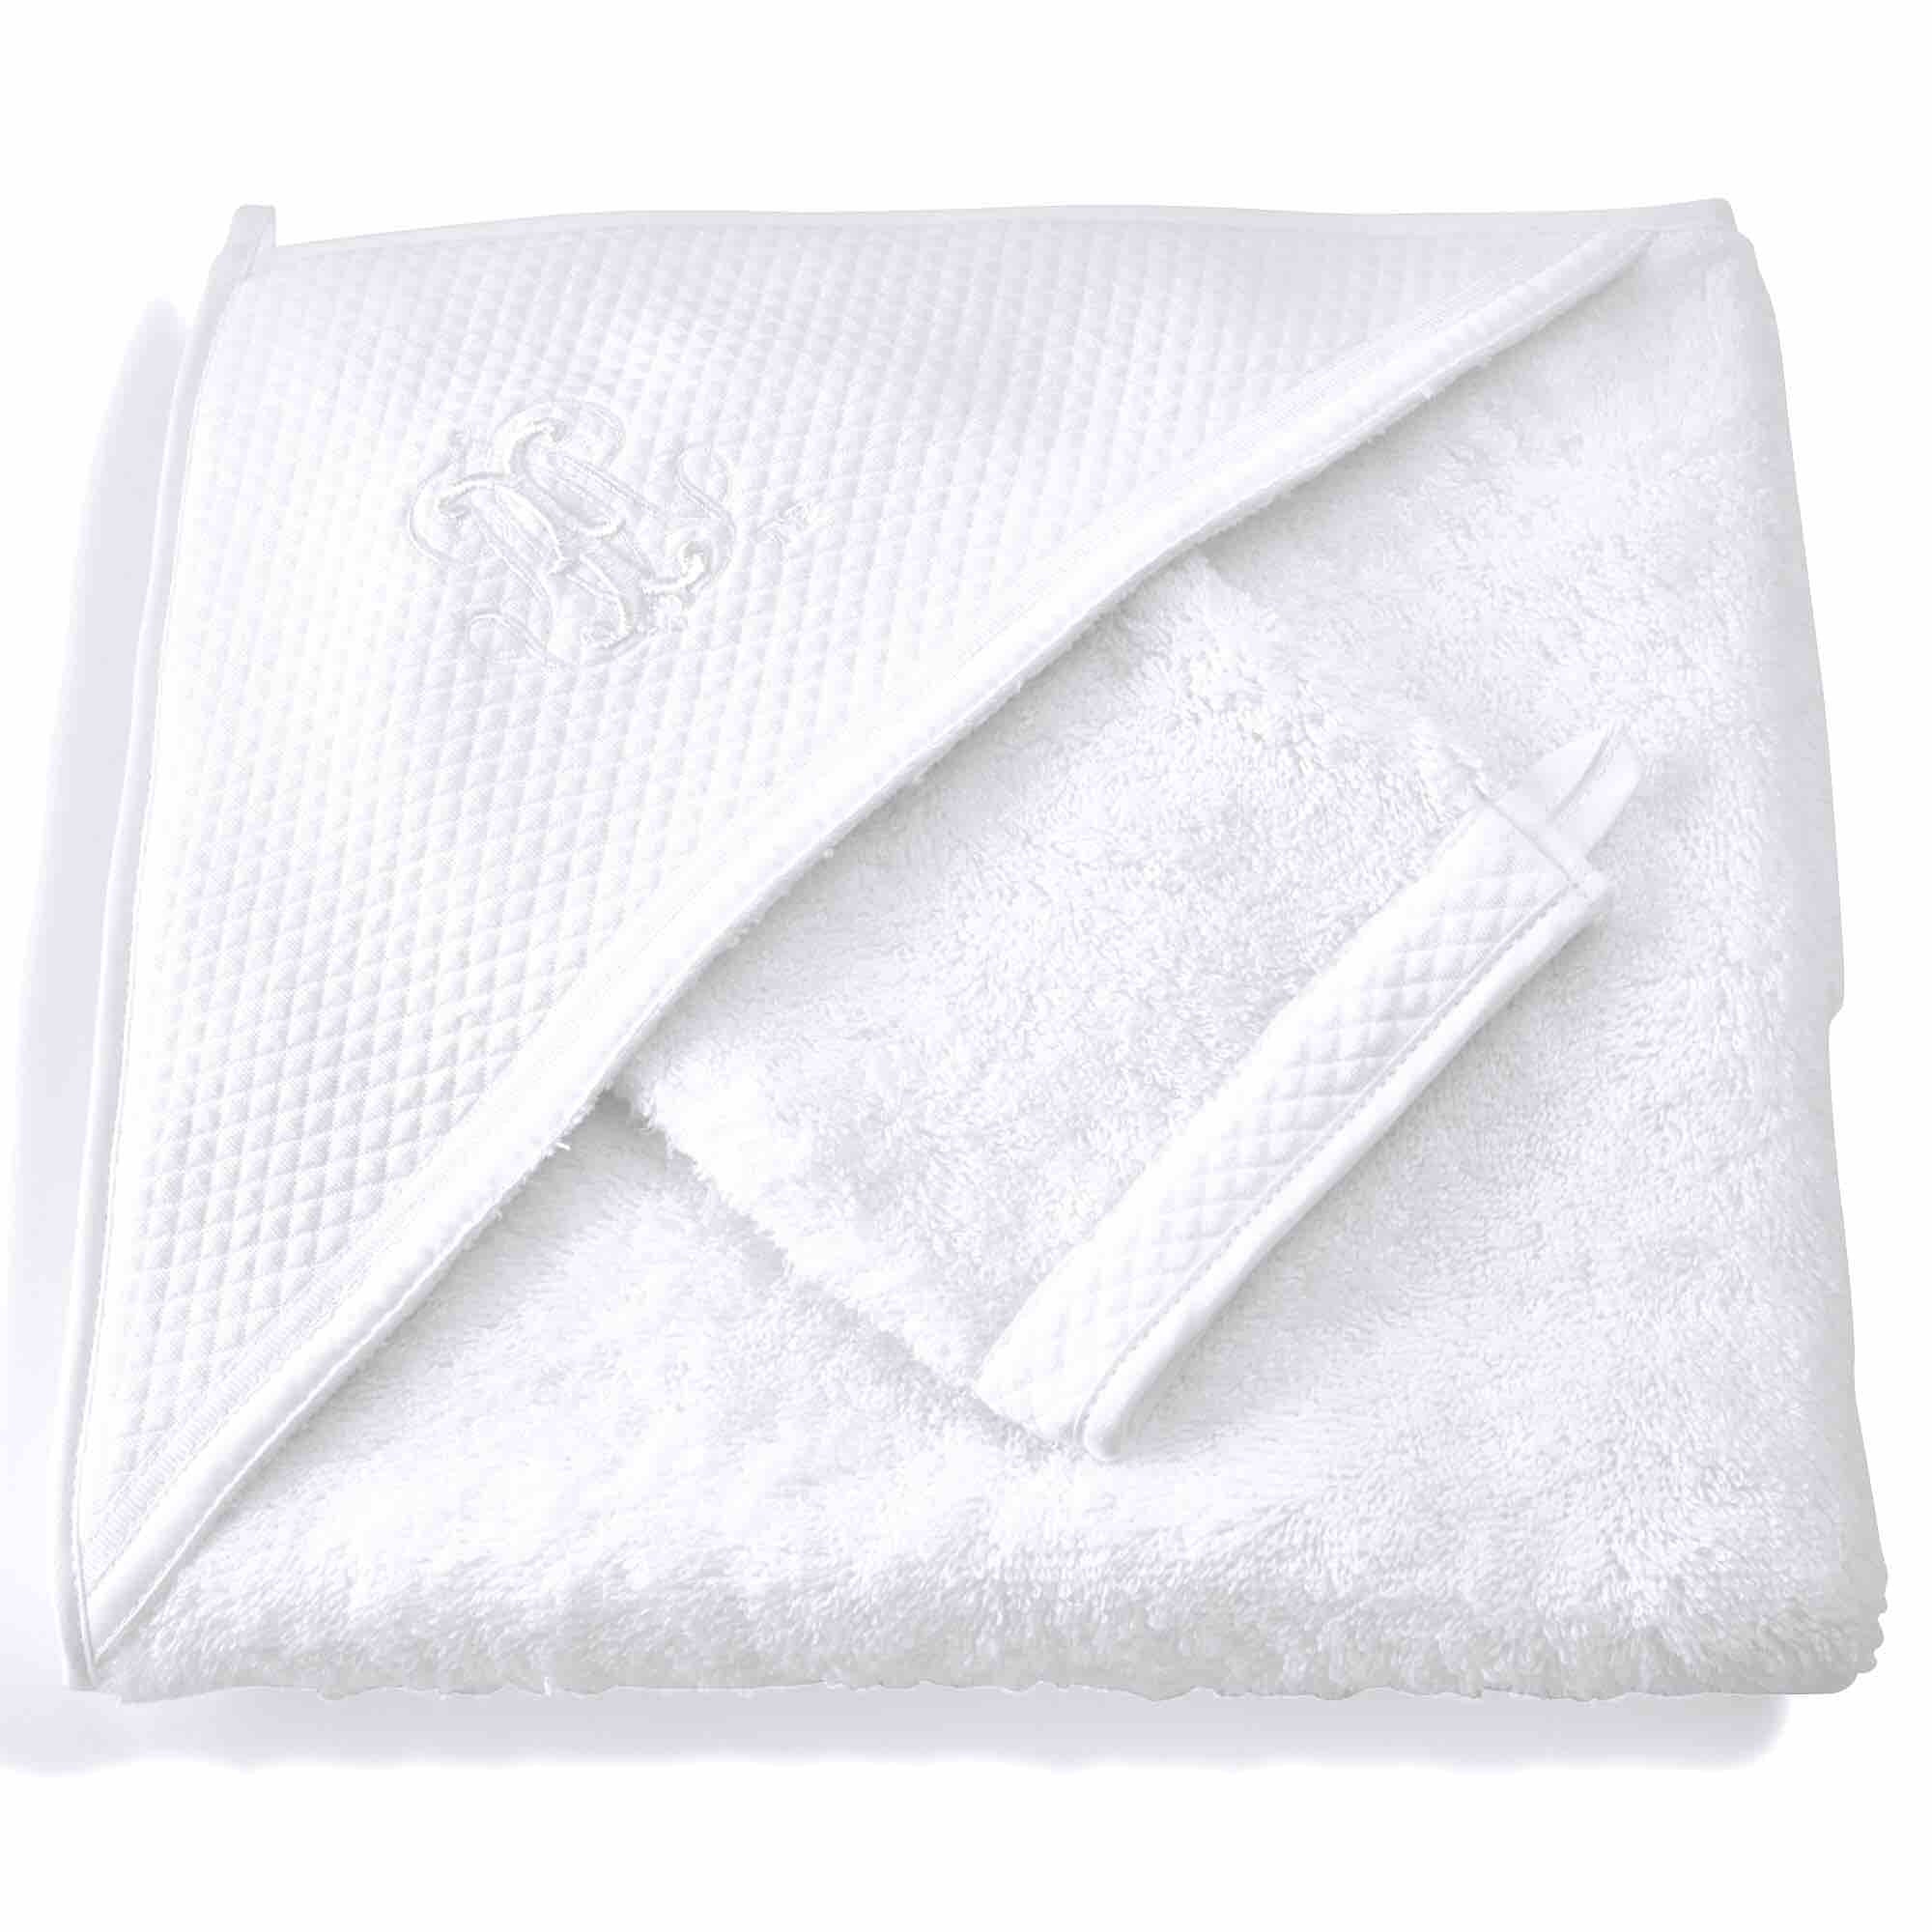 Theophile & Patachou Hooded Towel - Royal White